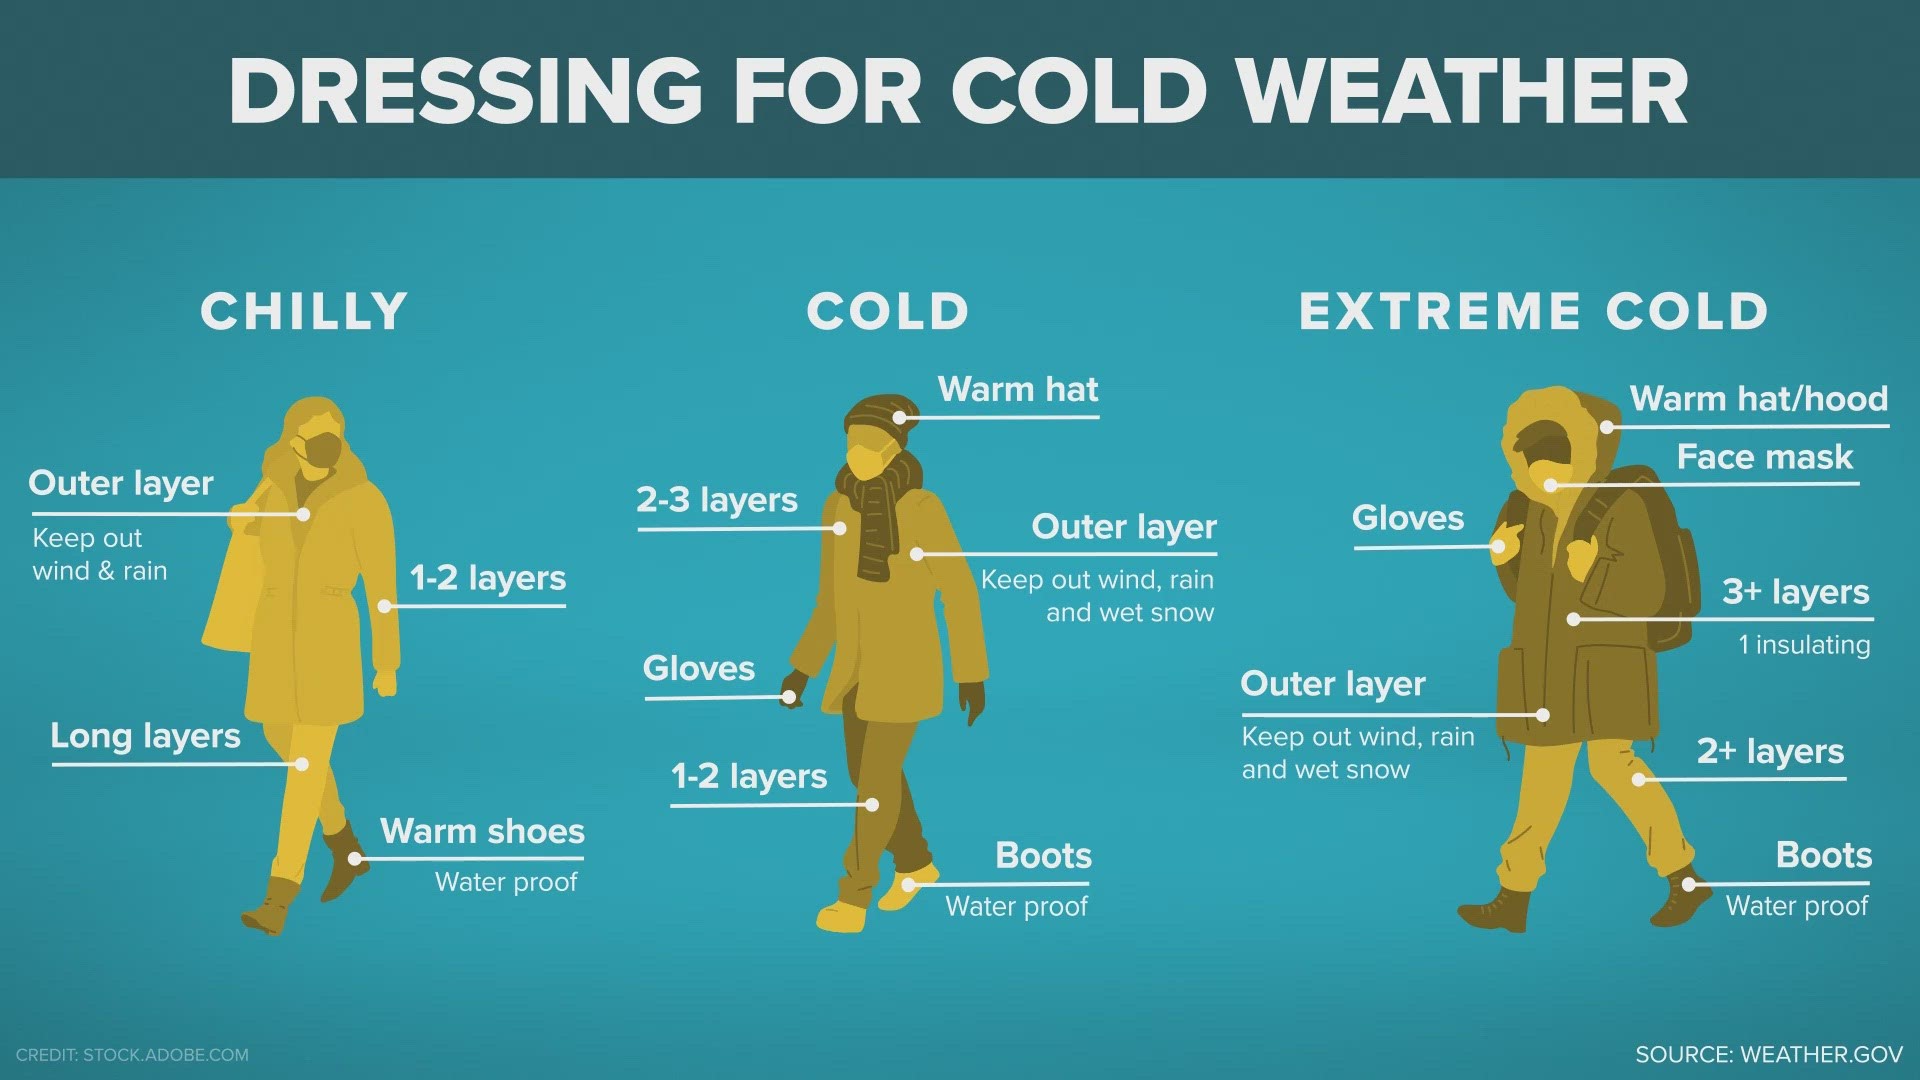 For families sending their kids to class or anyone planning to be out in the chilly weather, KVUE's Eric Pointer has some tips for getting dressed to stay warm.